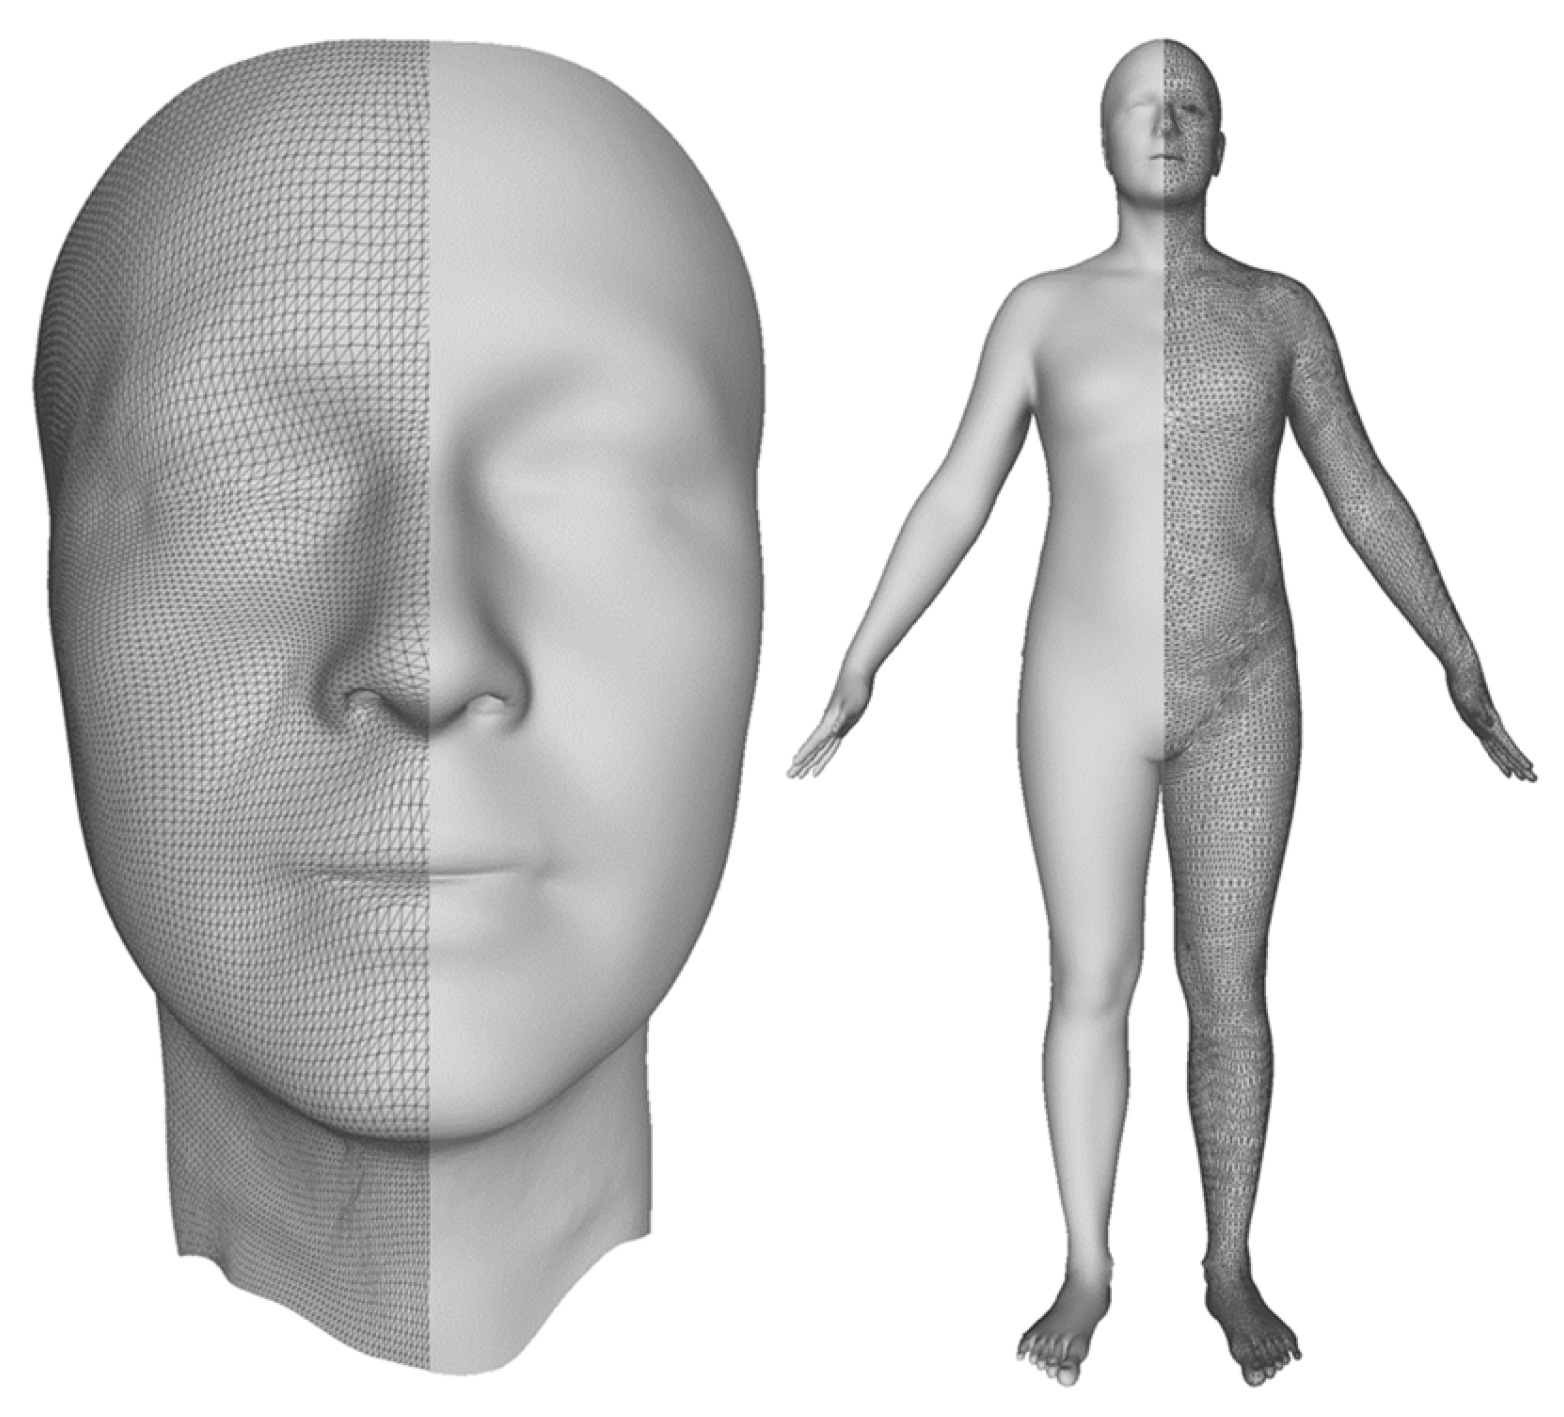 Sensors | Free Full-Text | Generating High-Resolution 3D Faces and Bodies  Using VQ-VAE-2 with PixelSNAIL Networks on 2D Representations